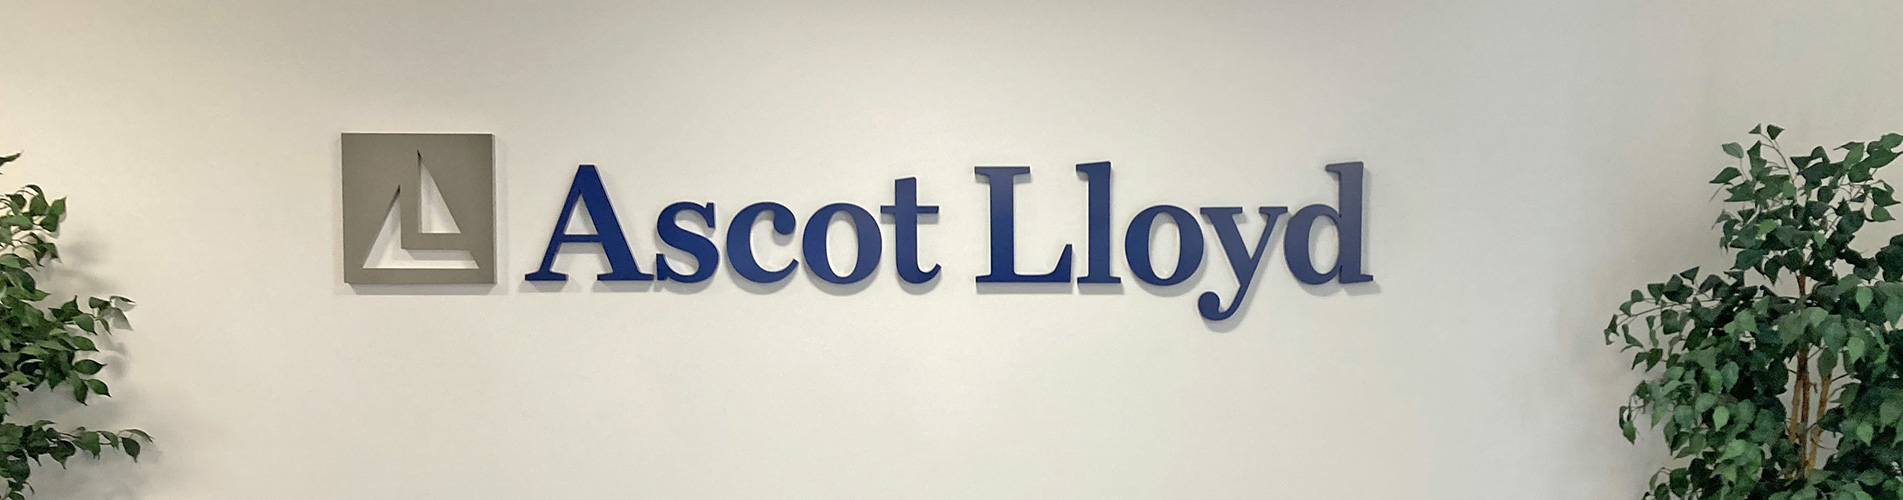 Ascot Lloyd complaints policy and procedure explained